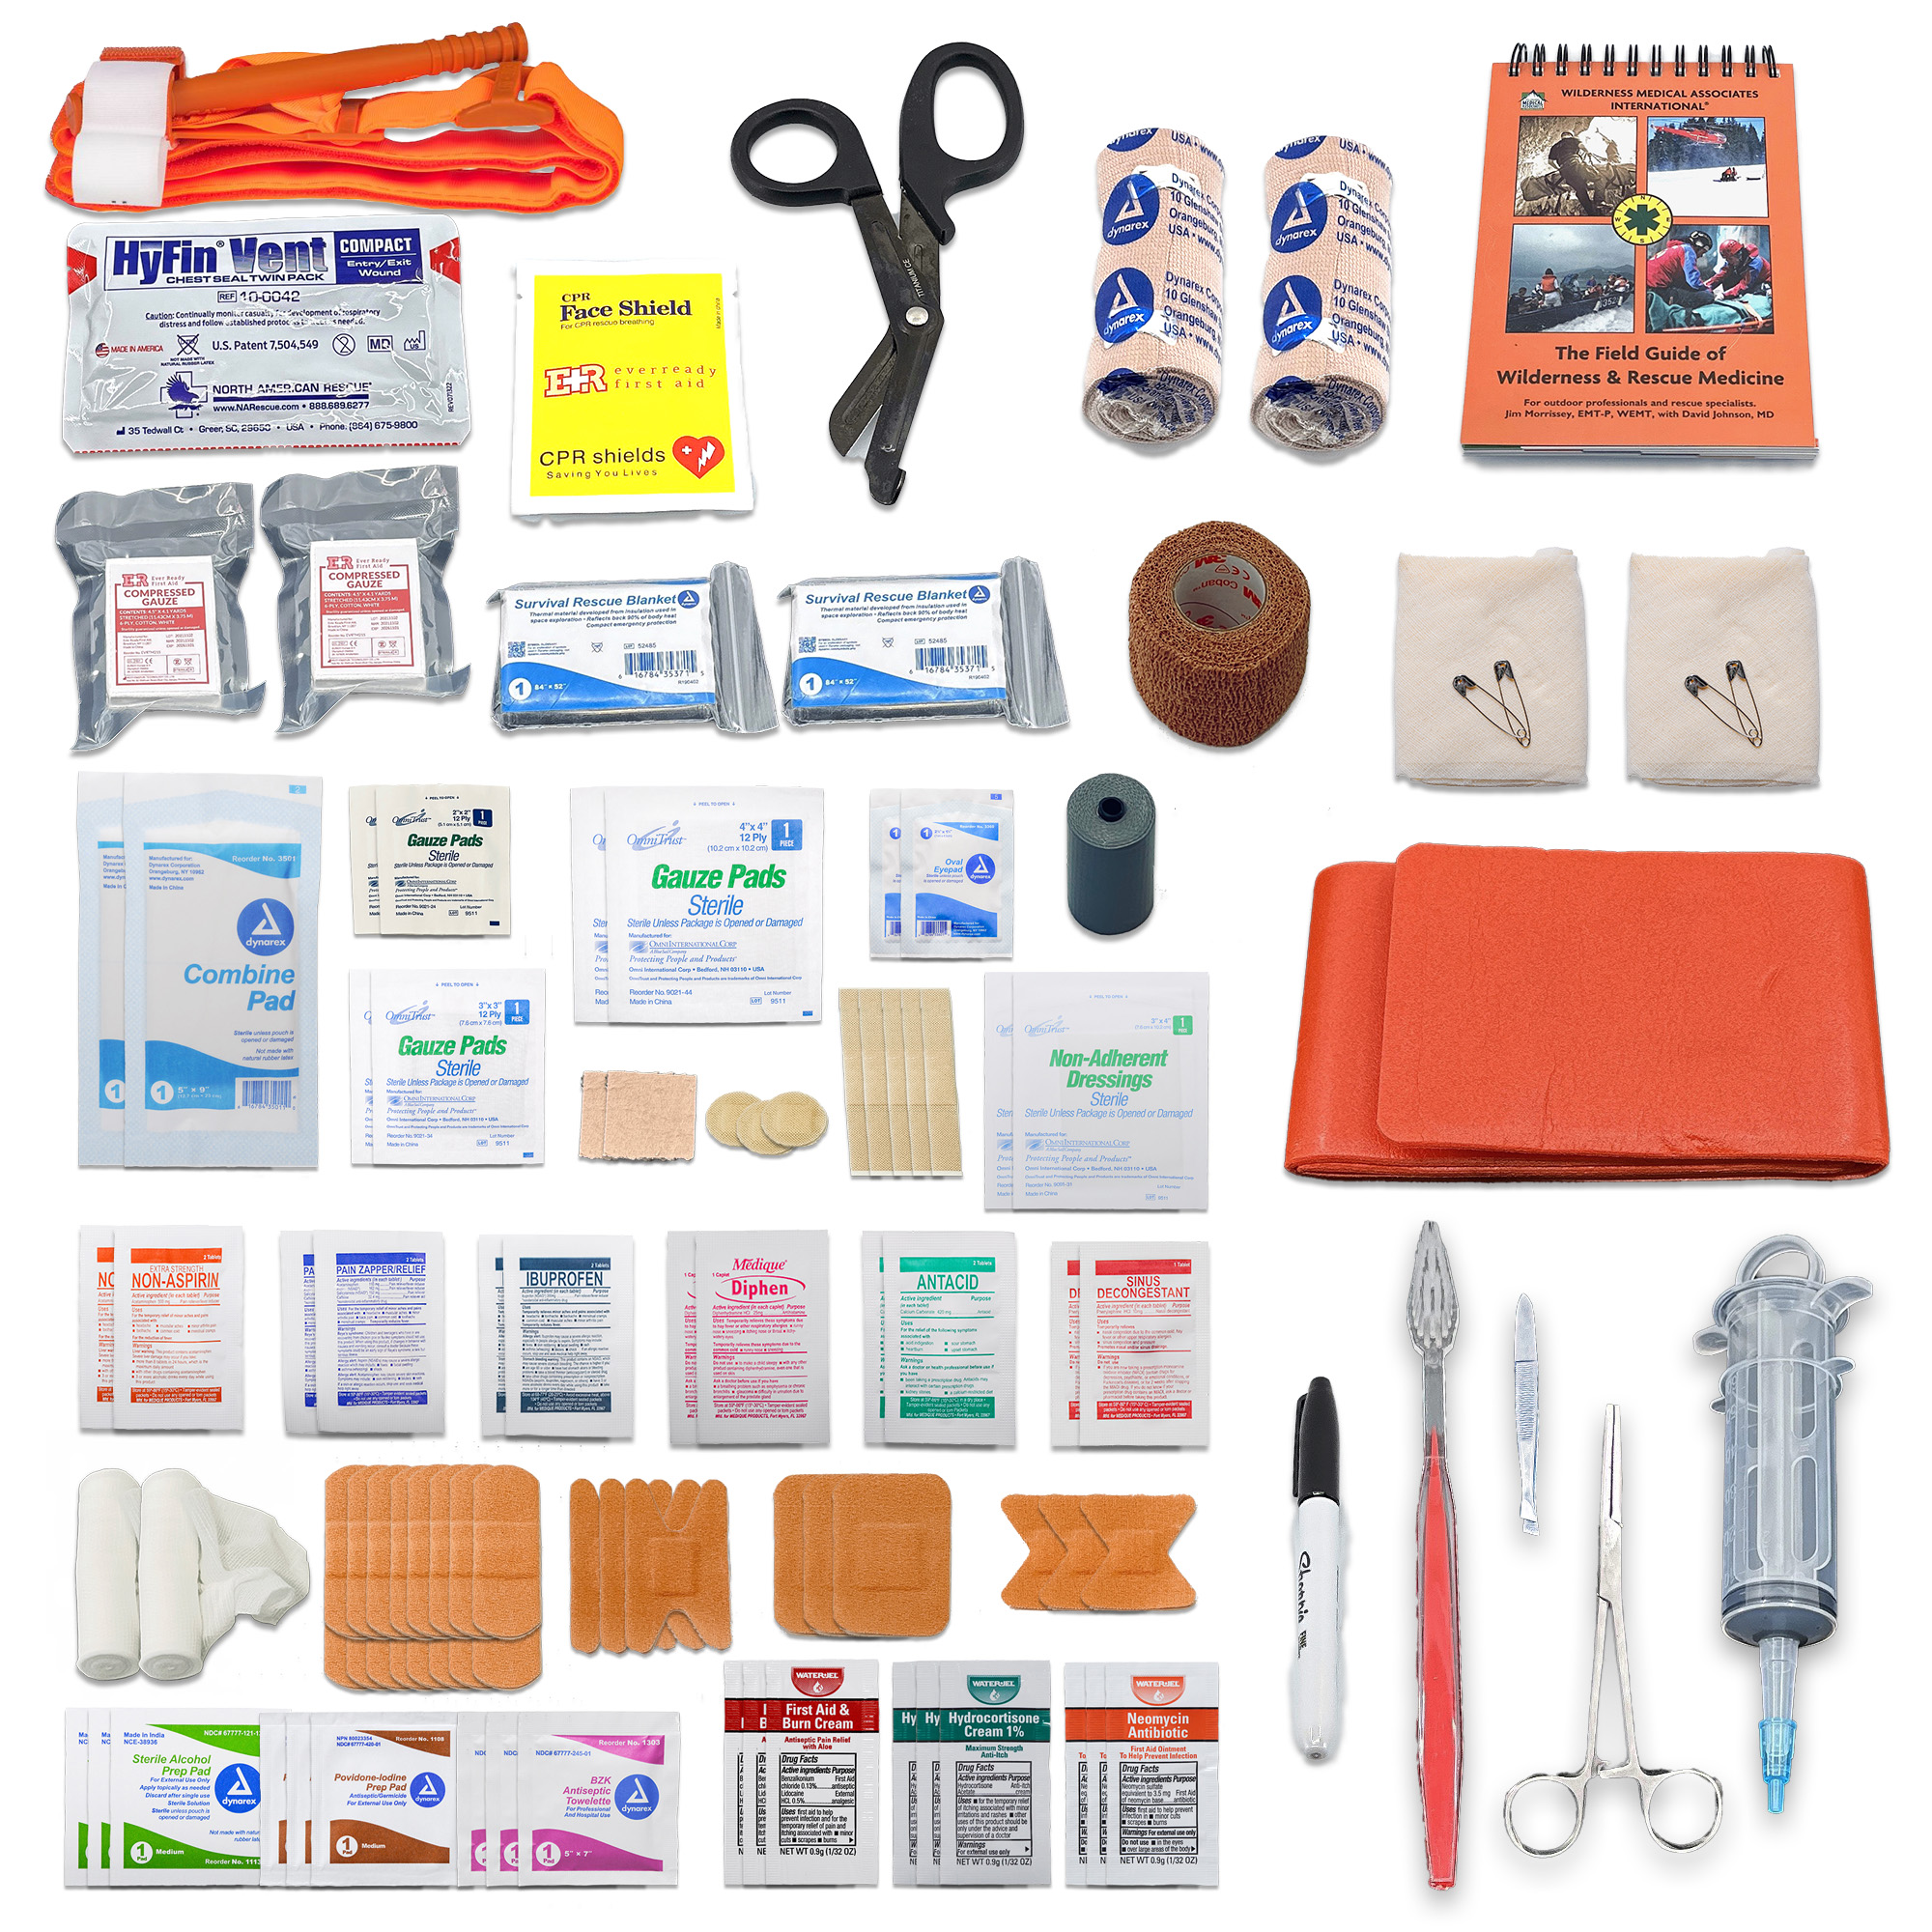 What makes MPA First Aid Kits Better?